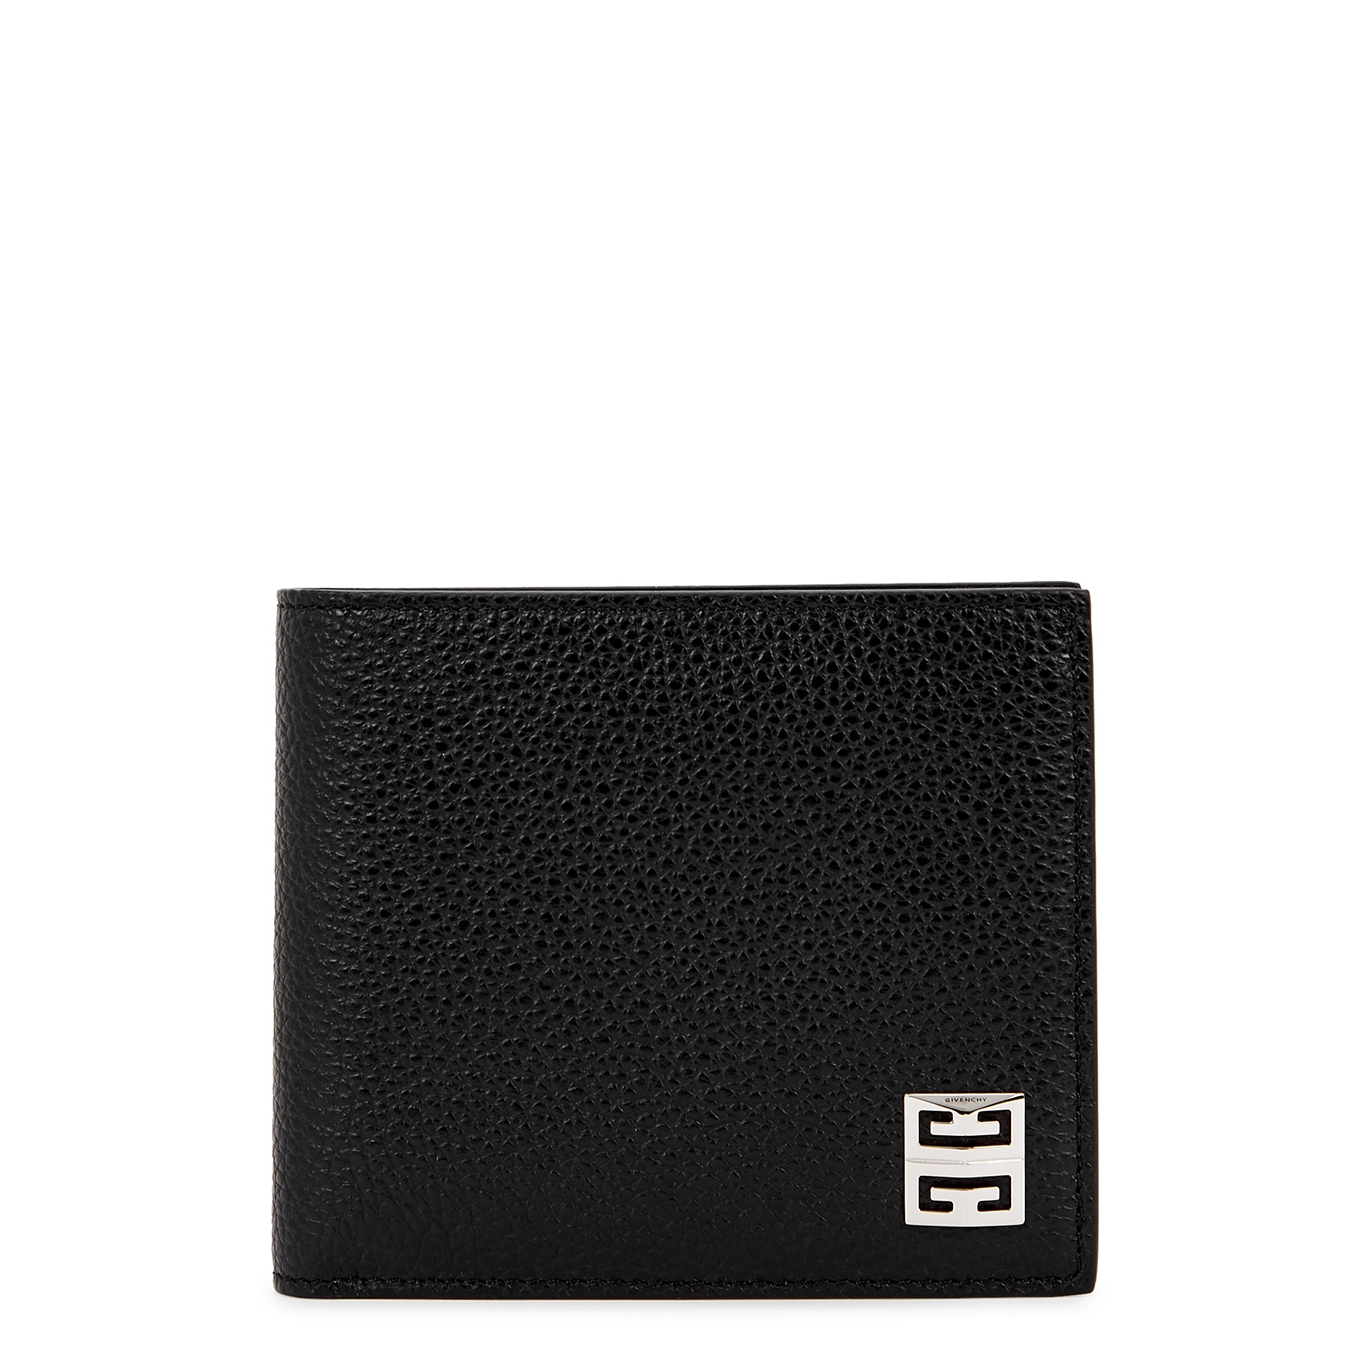 Givenchy Black Logo Leather Wallet